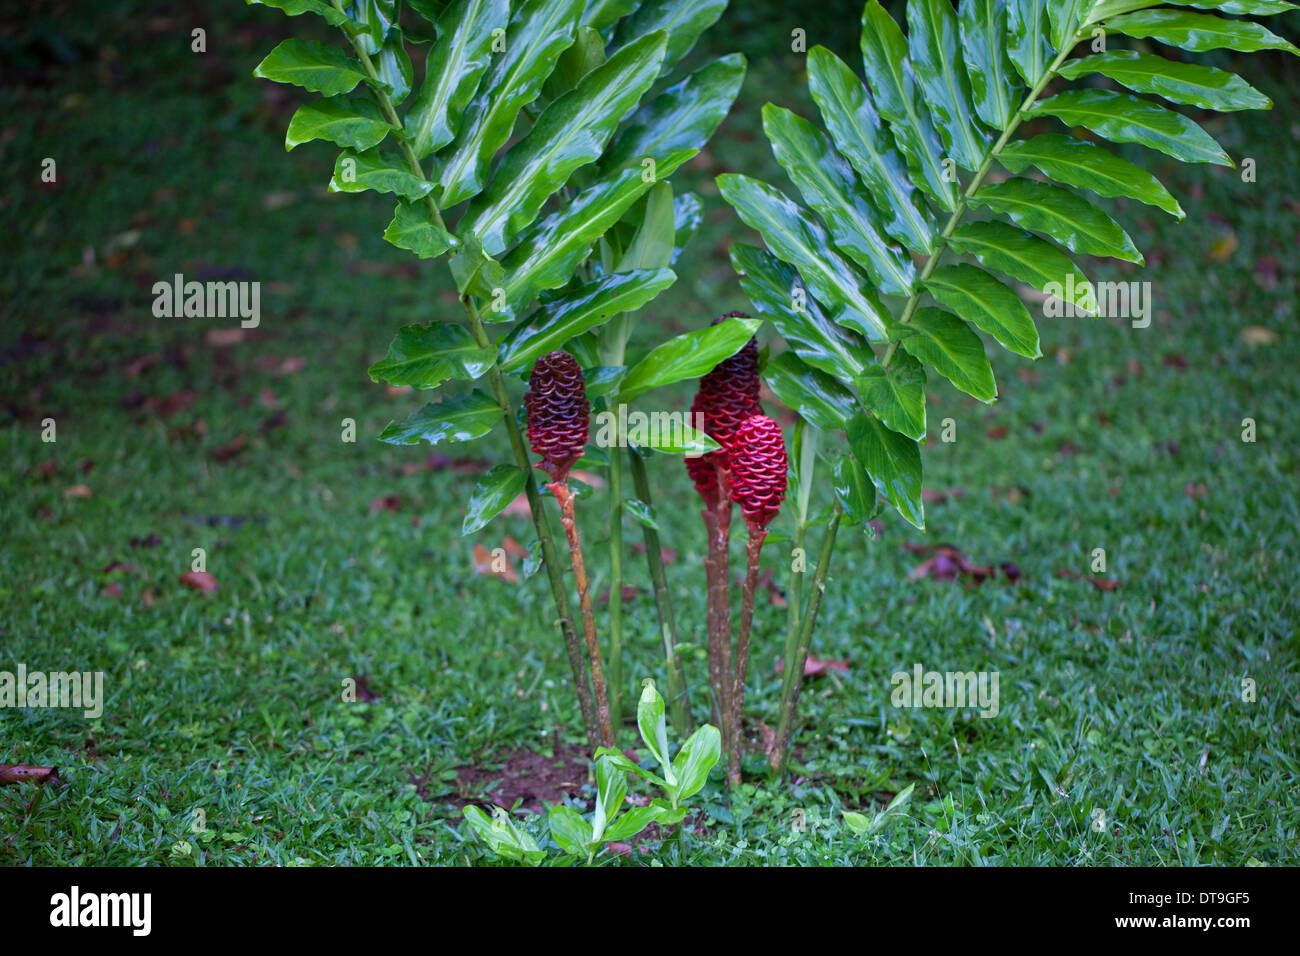 Shampoo or Pinecone Ginger (Zingiber zerumbet). Plant with red cones. Savegre. Costa Rica. Central America. Stock Photo